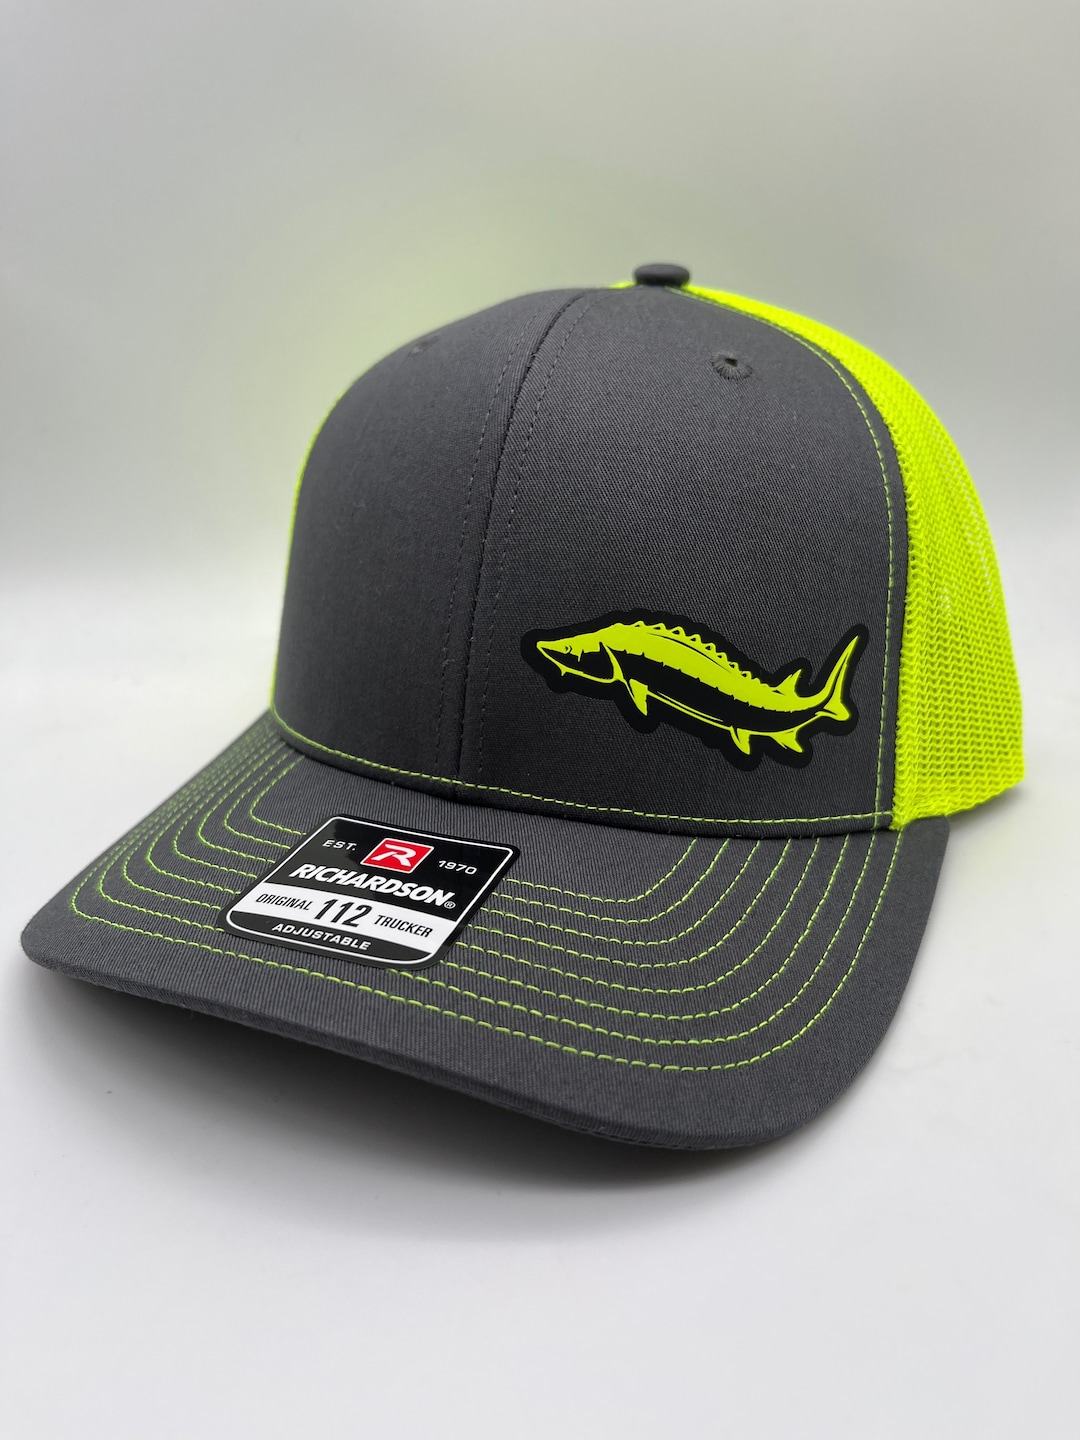 Sturgeon Fishing Snap Back Adjustable Hat With Multiple Hat